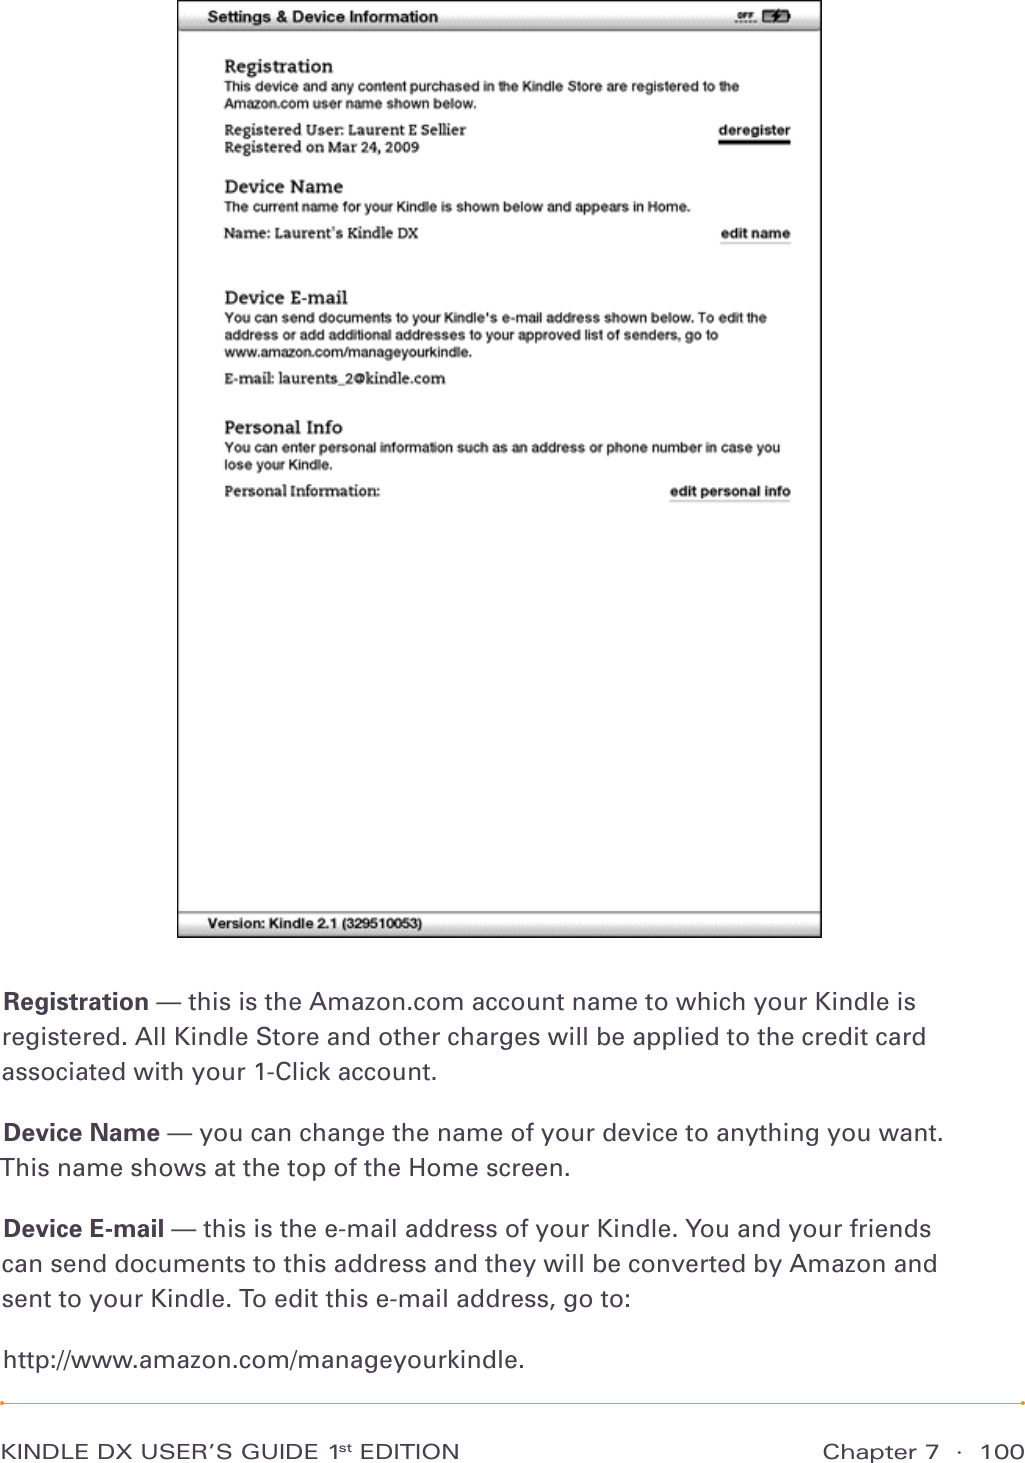 Chapter 7  ·  100KINDLE DX USER’S GUIDE 1st EDITIONRegistration — this is the Amazon.com account name to which your Kindle is registered. All Kindle Store and other charges will be applied to the credit card associated with your 1-Click account.Device Name — you can change the name of your device to anything you want. This name shows at the top of the Home screen.Device E-mail — this is the e-mail address of your Kindle. You and your friends can send documents to this address and they will be converted by Amazon and  sent to your Kindle. To edit this e-mail address, go to: http://www.amazon.com/manageyourkindle.